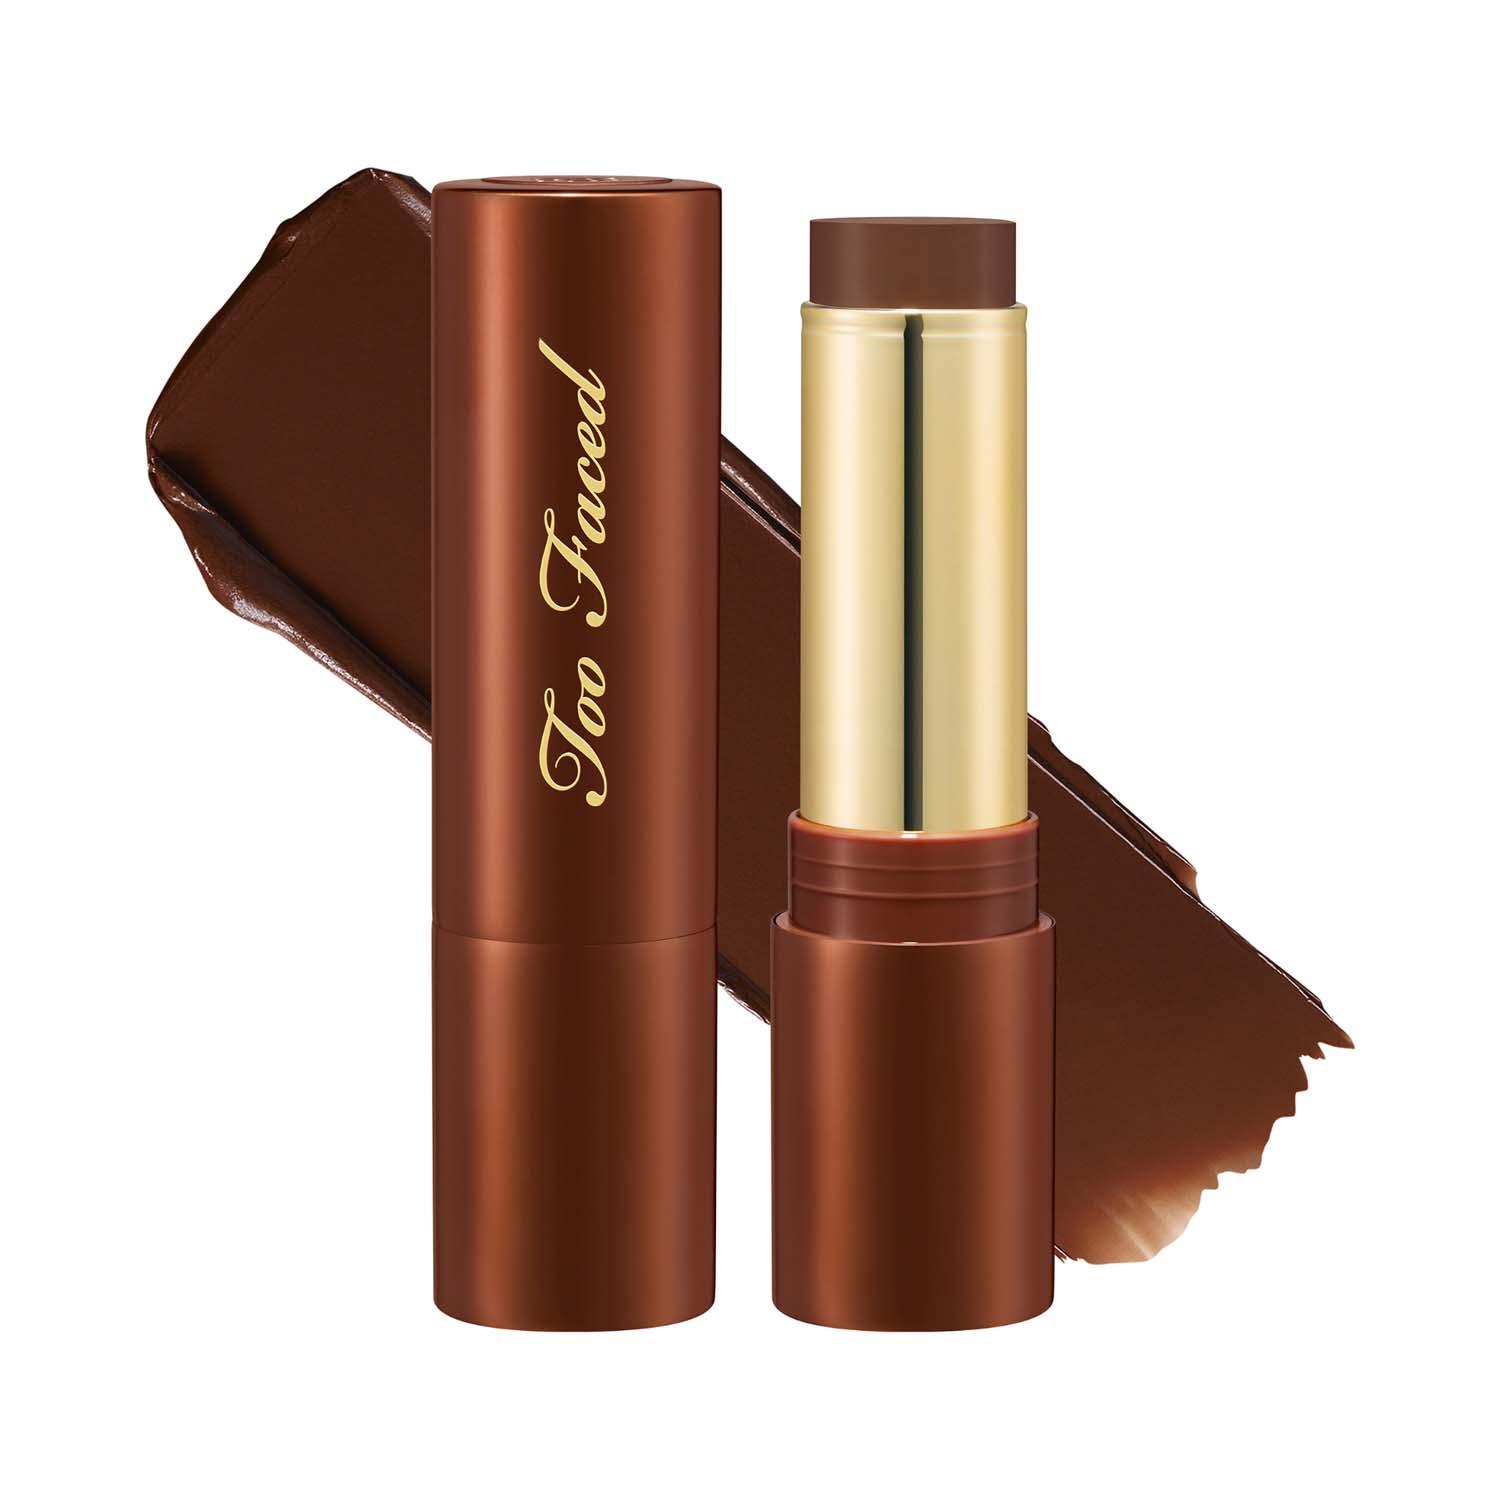 Too Faced | Too Faced Chocolate Soleil Multi-Use Creamy Bronzing & Sculpting Stick - Chocolate Lava (8 g)